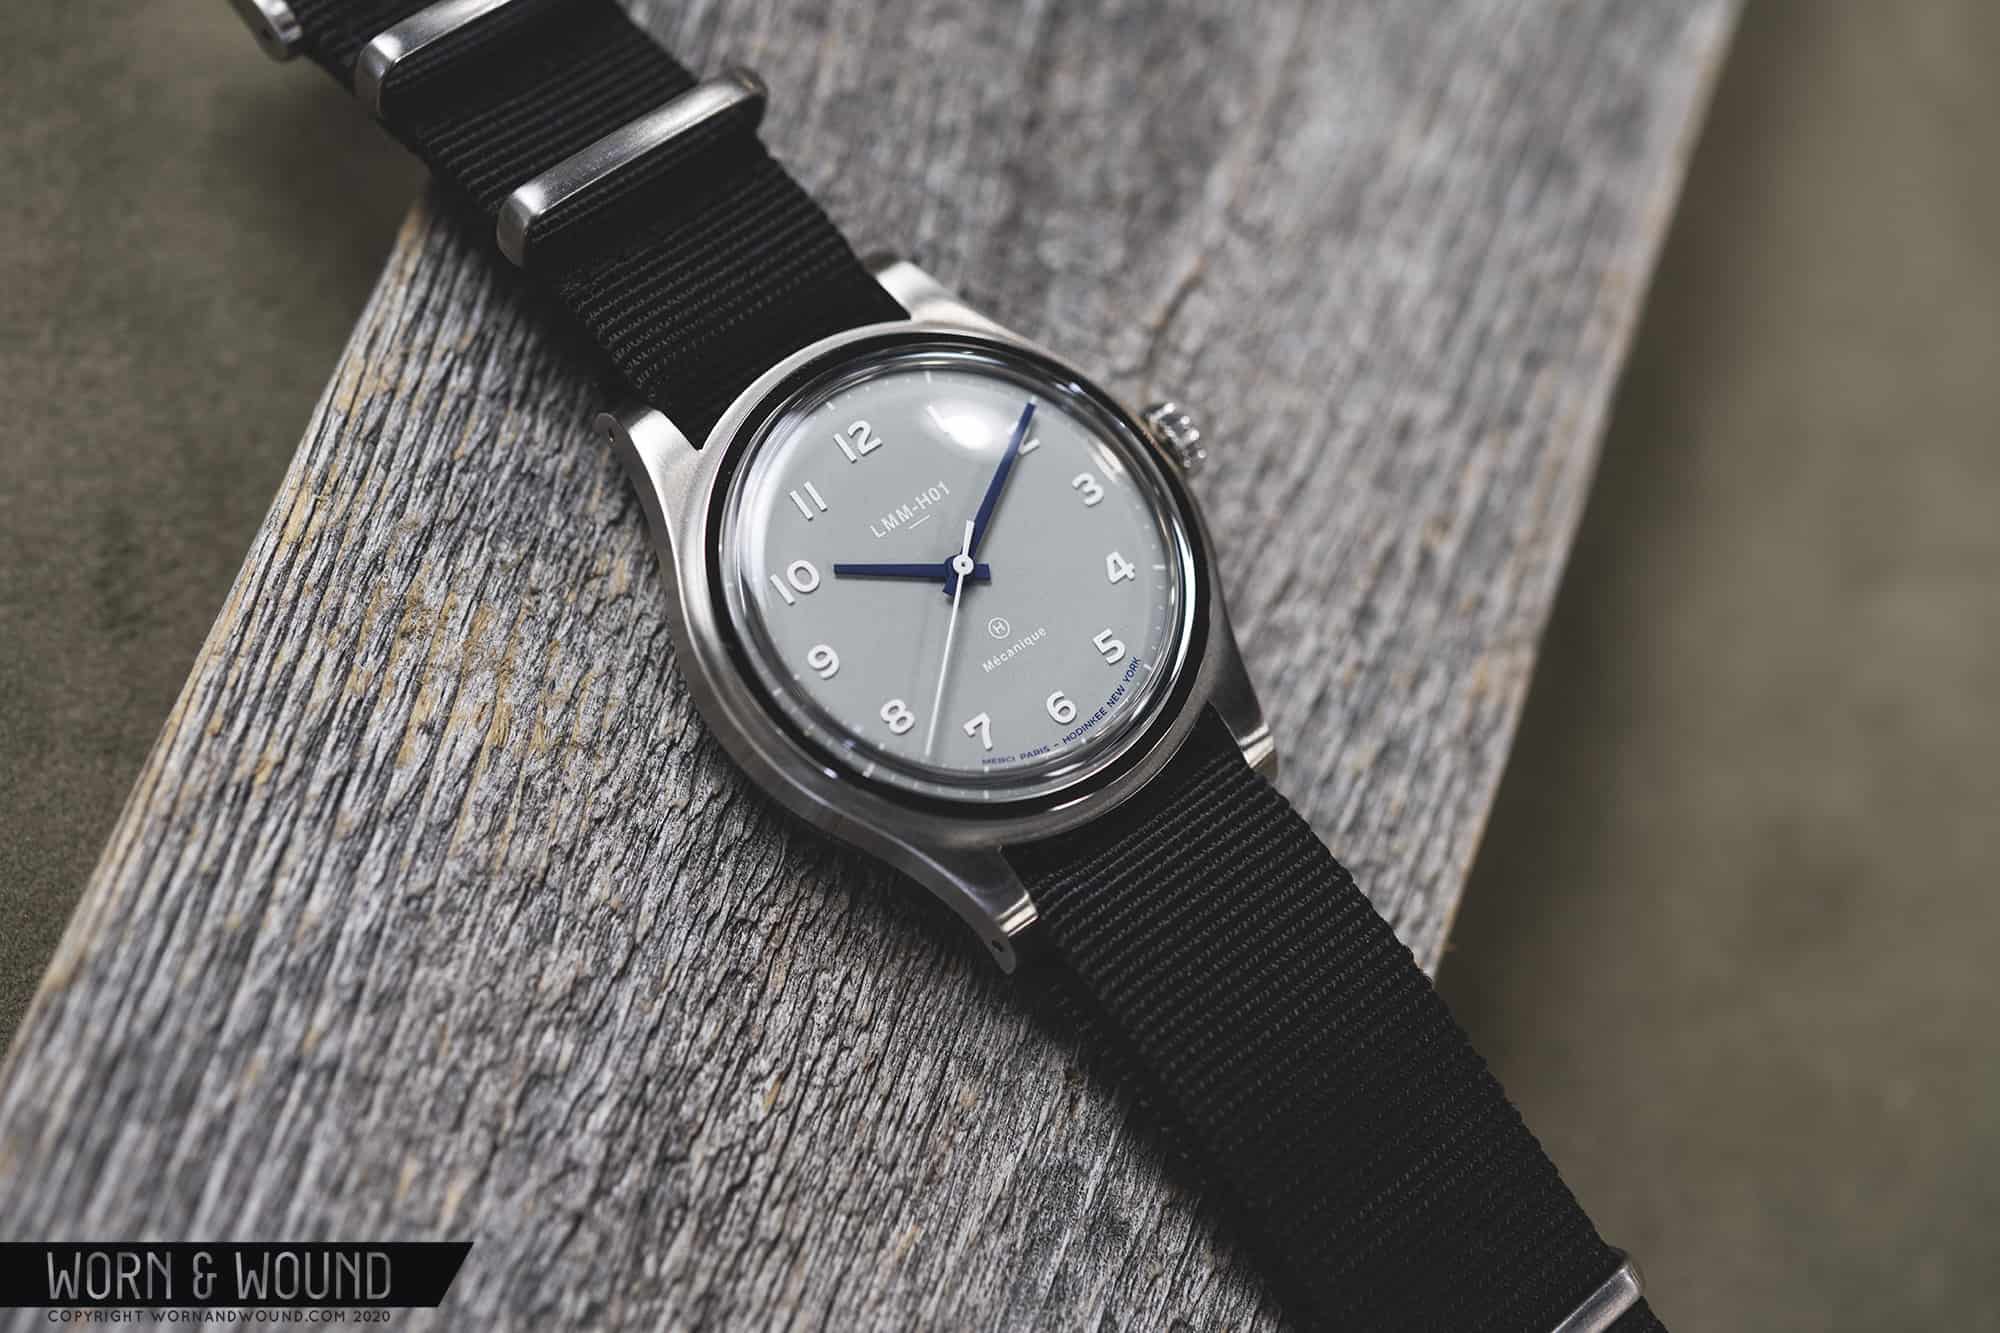 Introducing the Merci x Hodinkee LMM-H01 Limited Edition